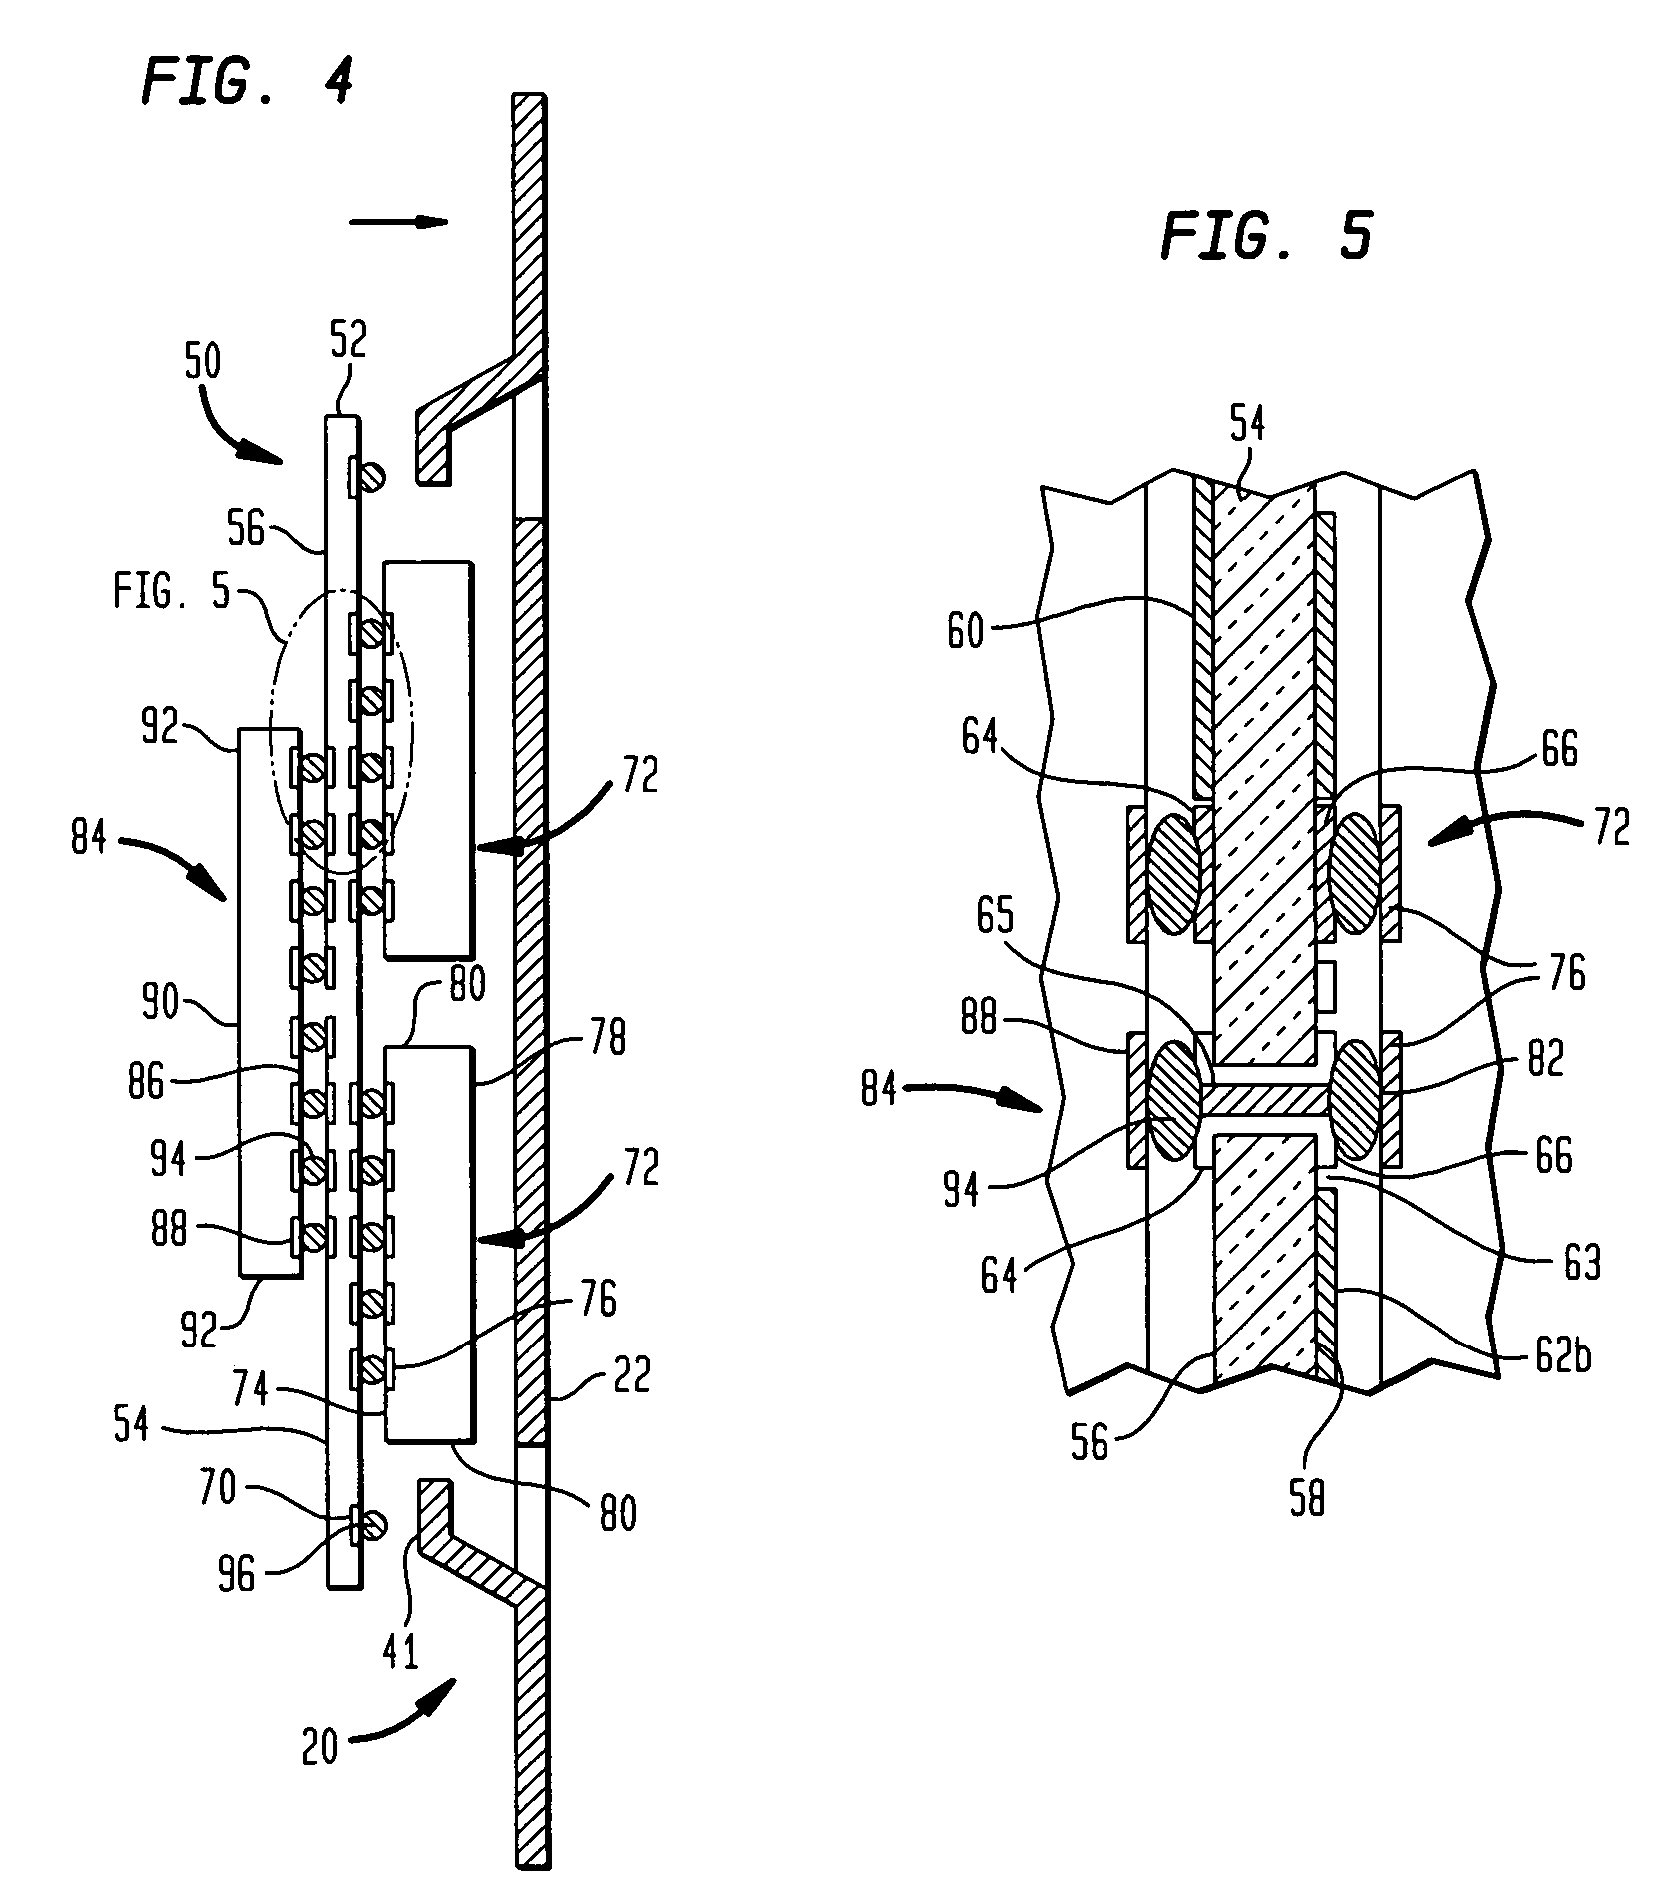 High frequency chip packages with connecting elements